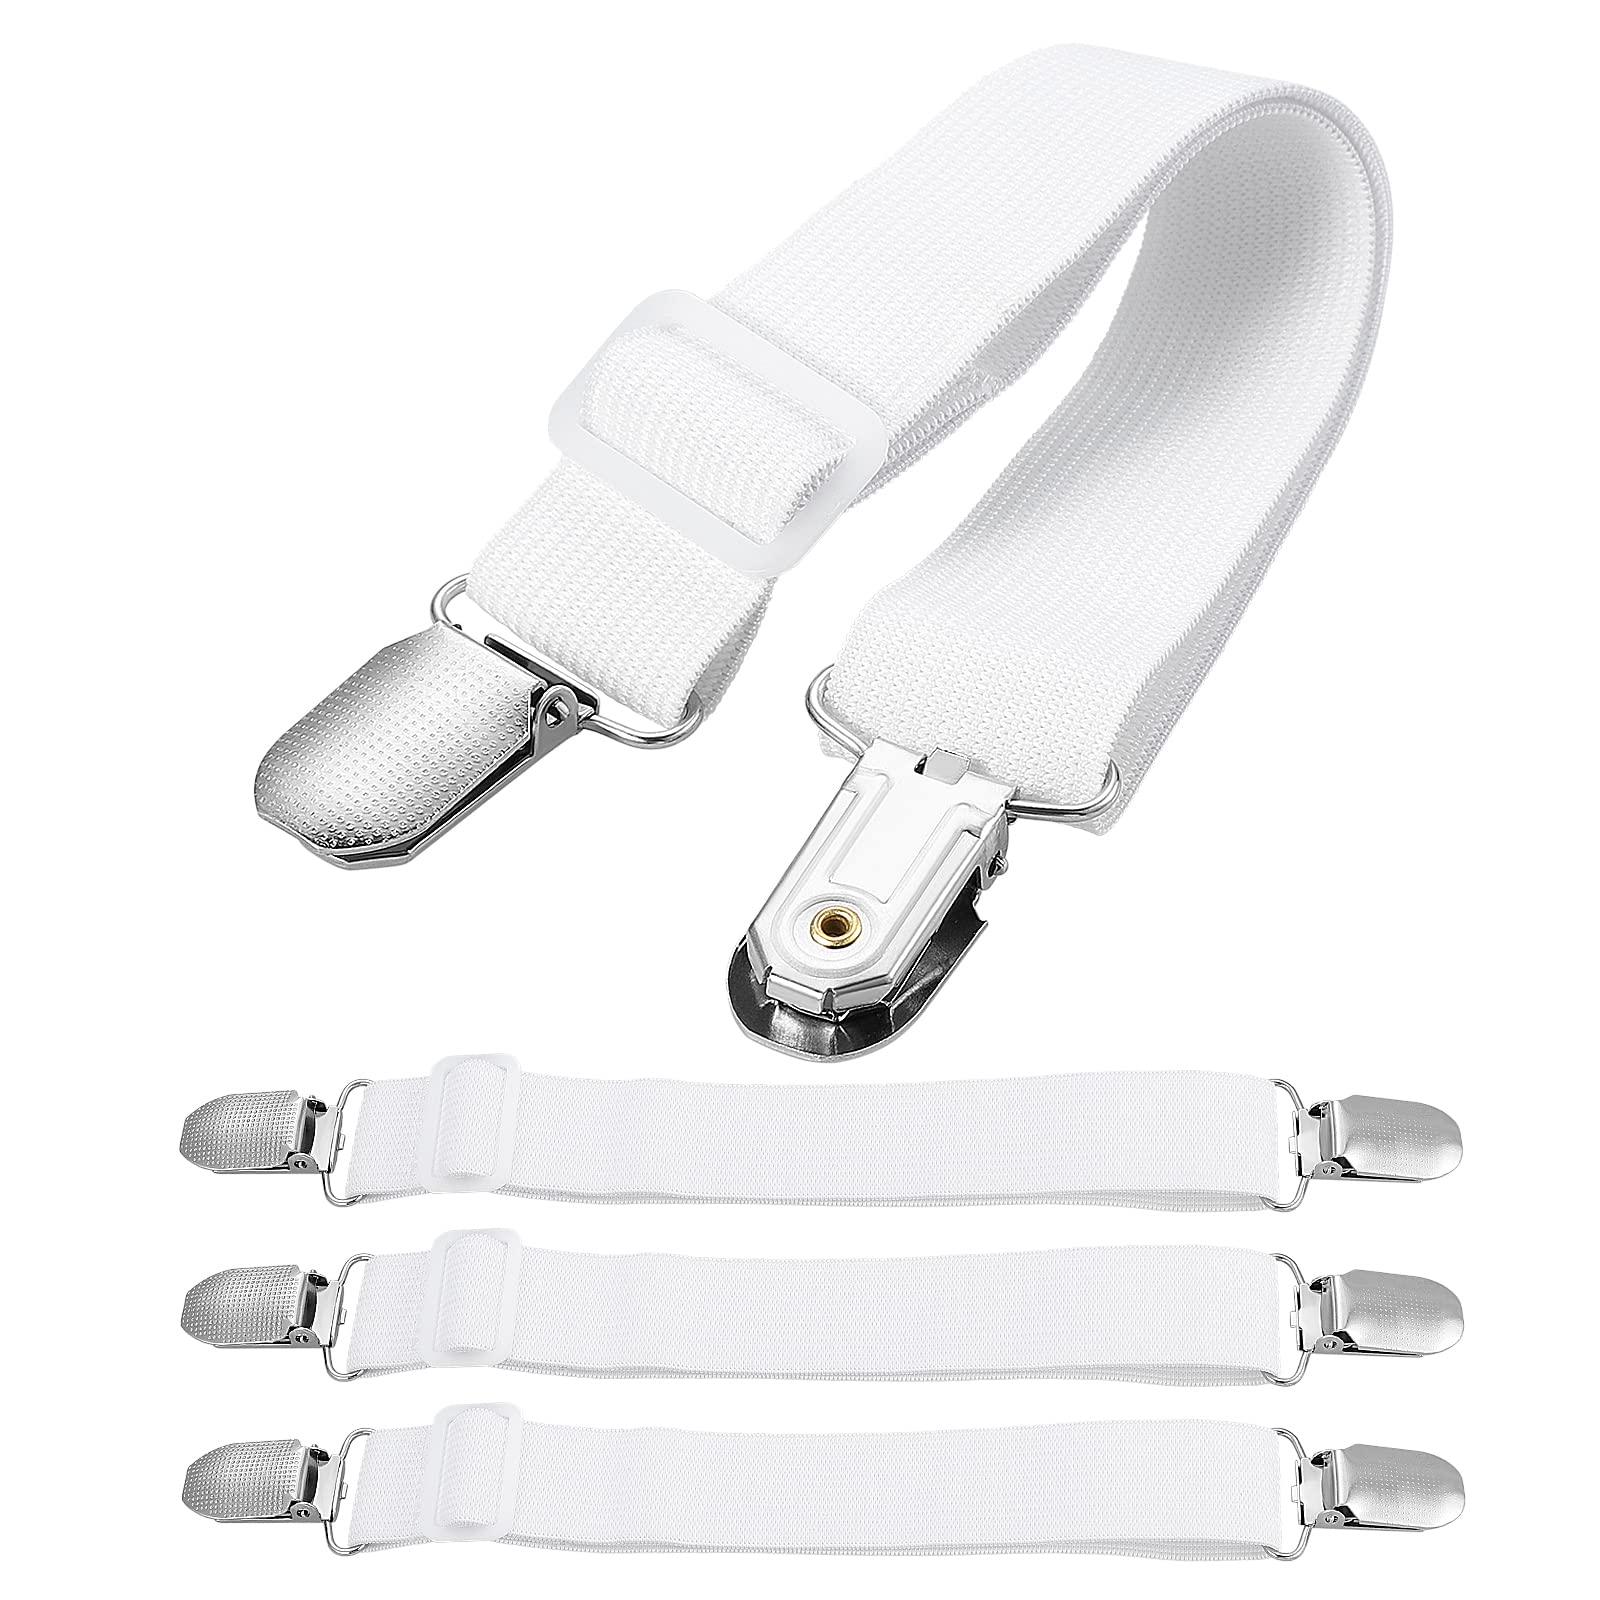 KEESIN 4PCS Adjustable Bed Fasteners,Fitted Sheet Clips with Elastic Holder Straps and Duckbill Metal Clips (White)